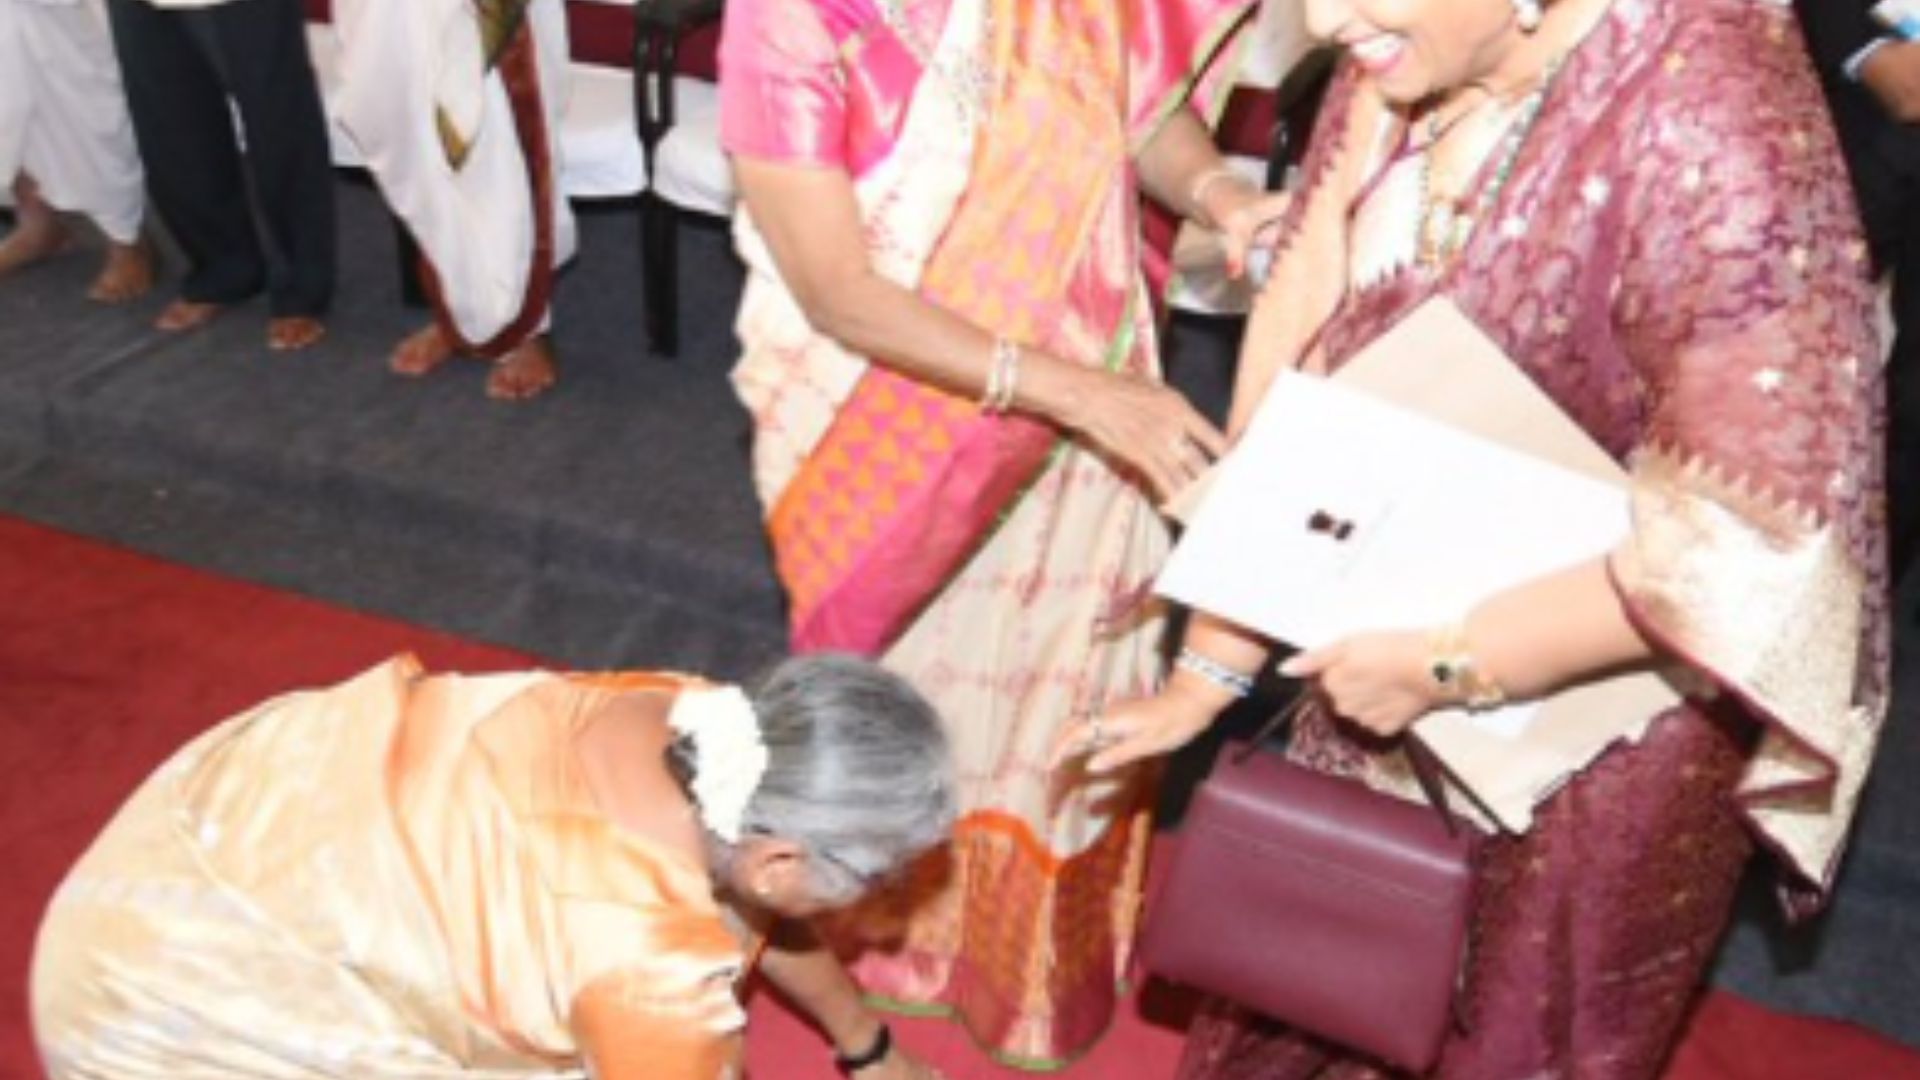 Twitter Question Sudha Murthy’s Gesture To Show Respect Towards A Mysore Royal. Umm, Why Do These Traditions Still Exist?